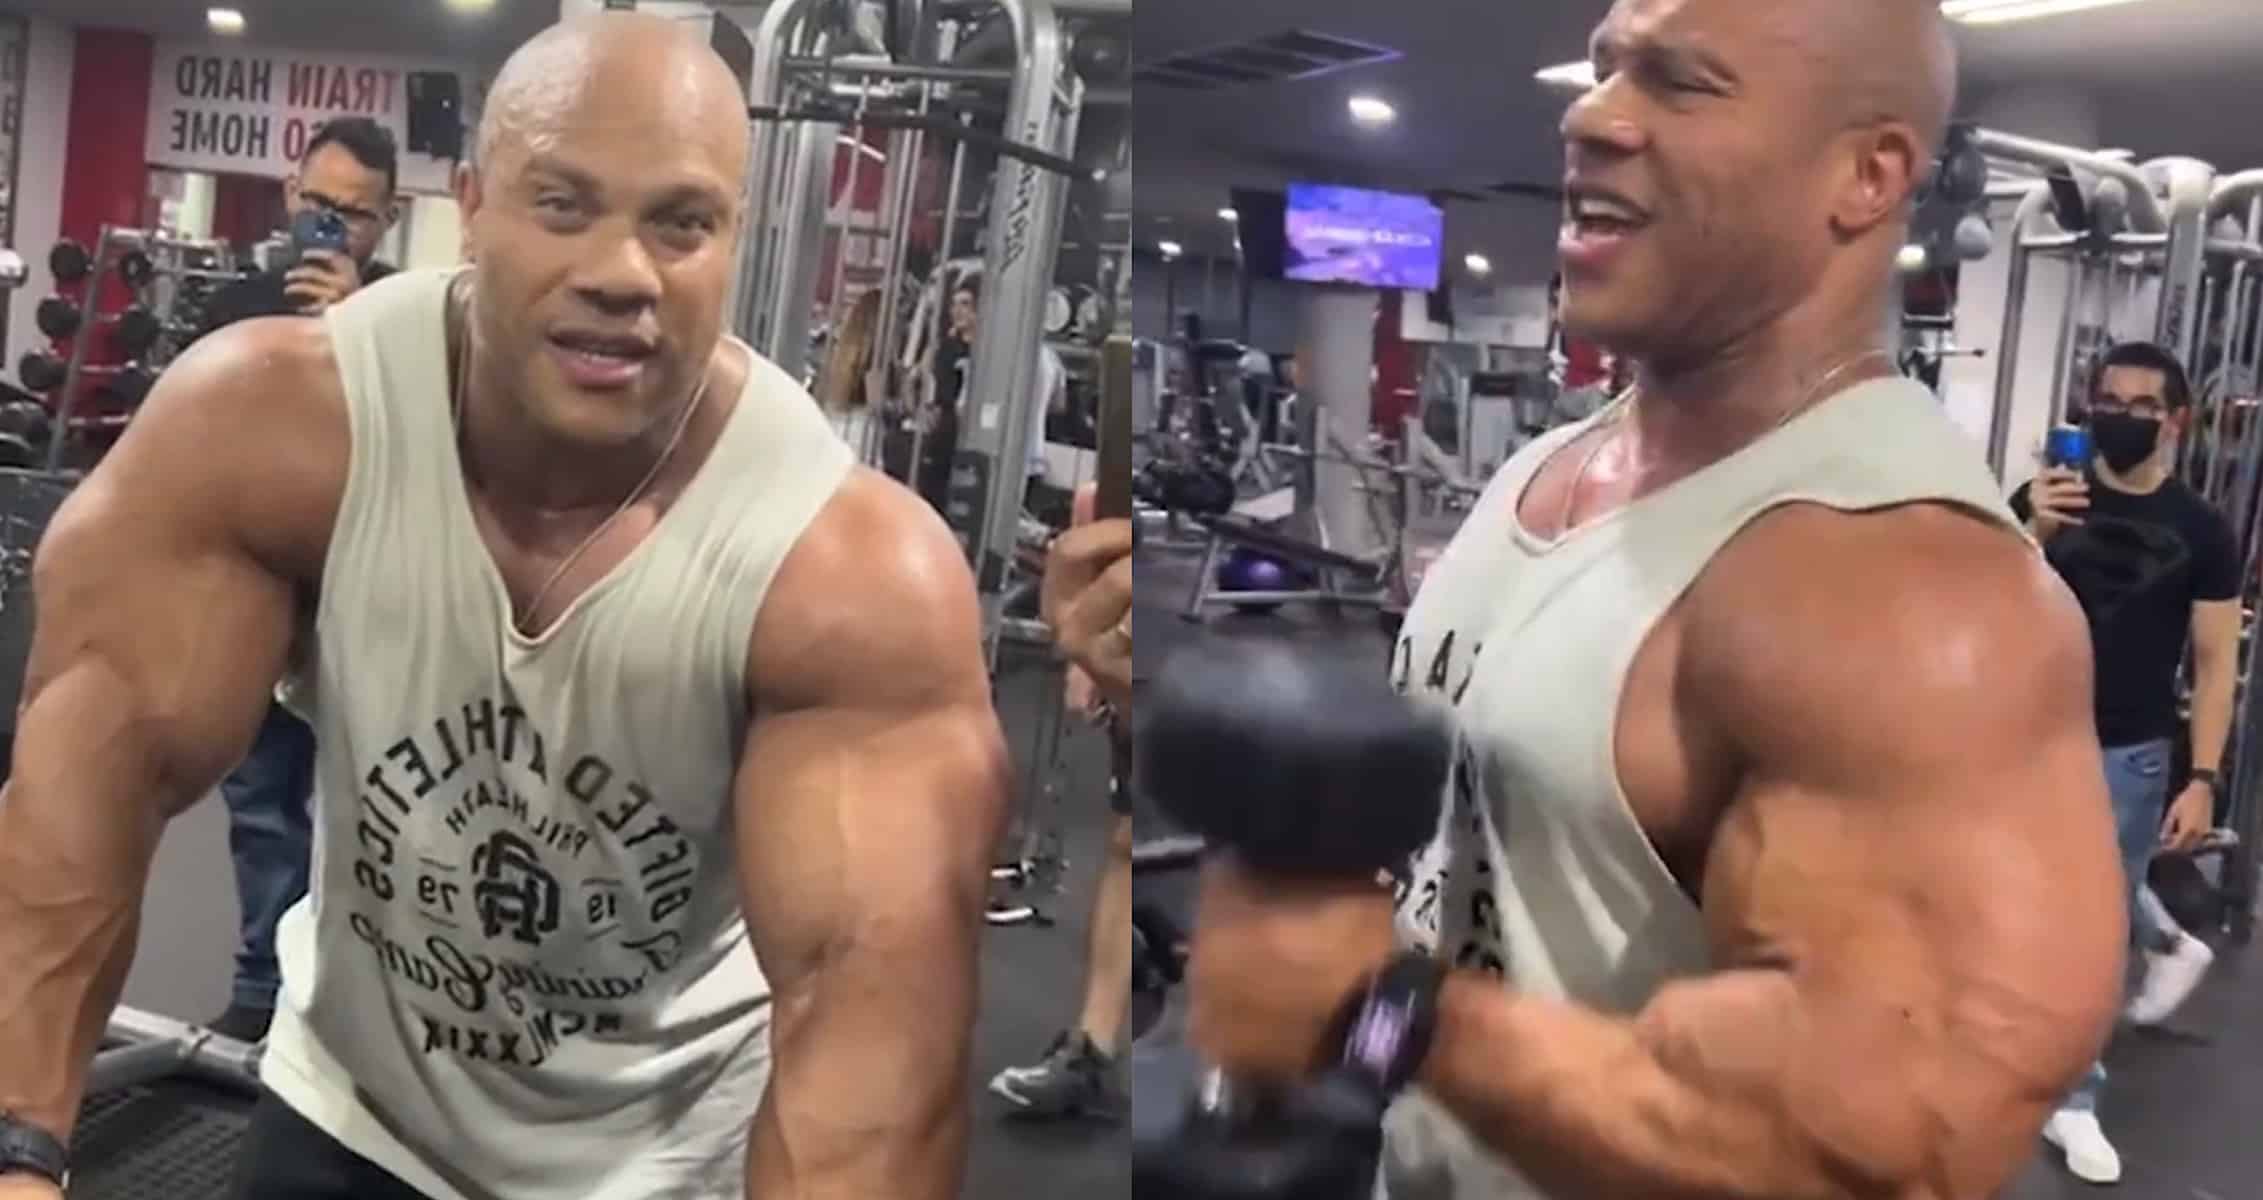 Phil Heath: “I Ain’t Done Yet. I’m Only Getting Started.”